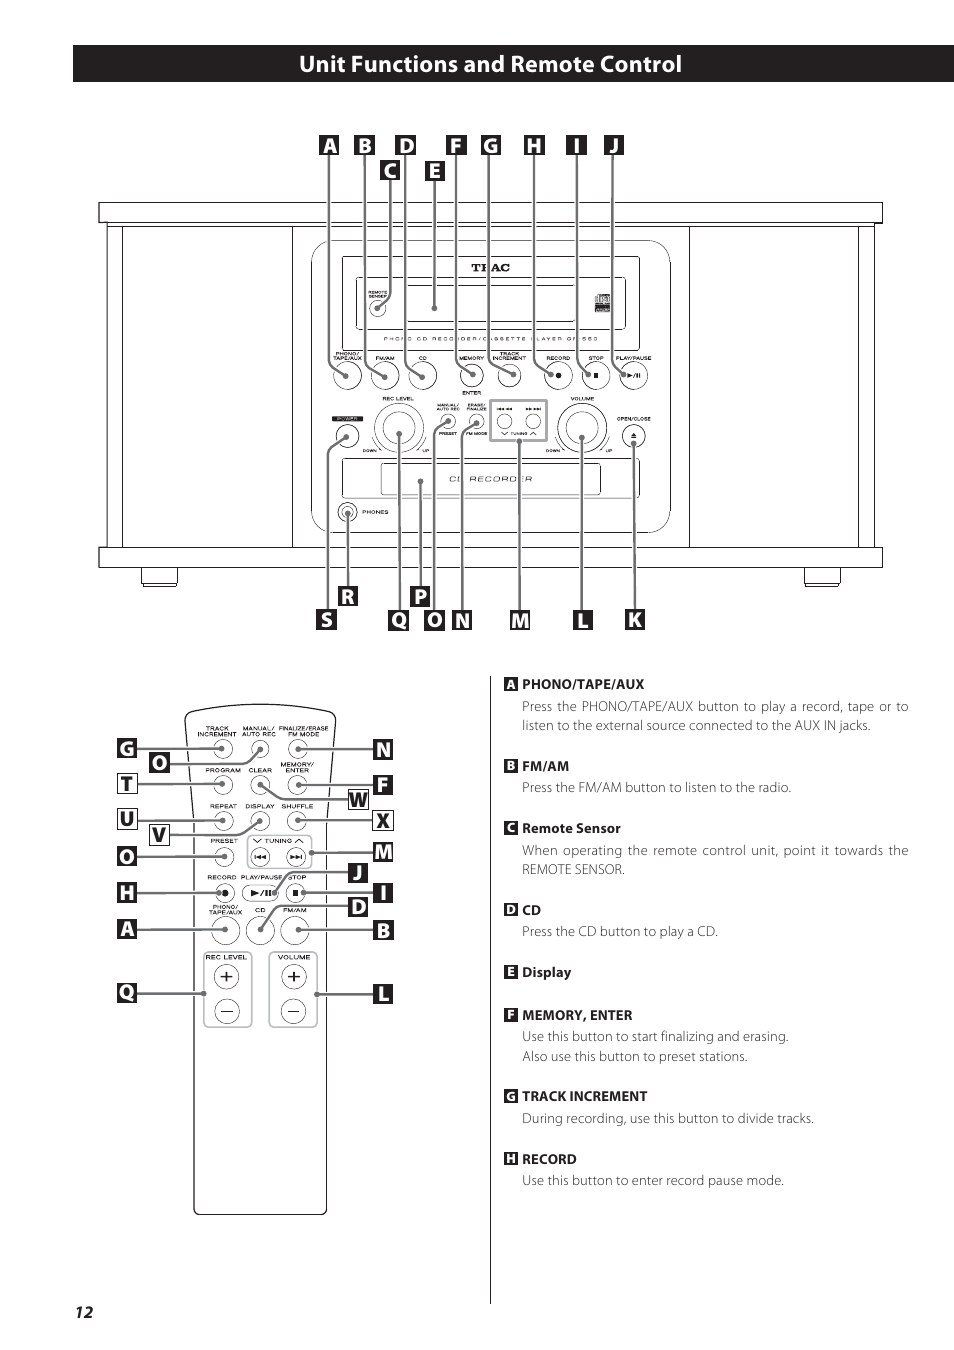 Unit functions and remote control | Teac GF-550 User Manual | Page 12 / 96